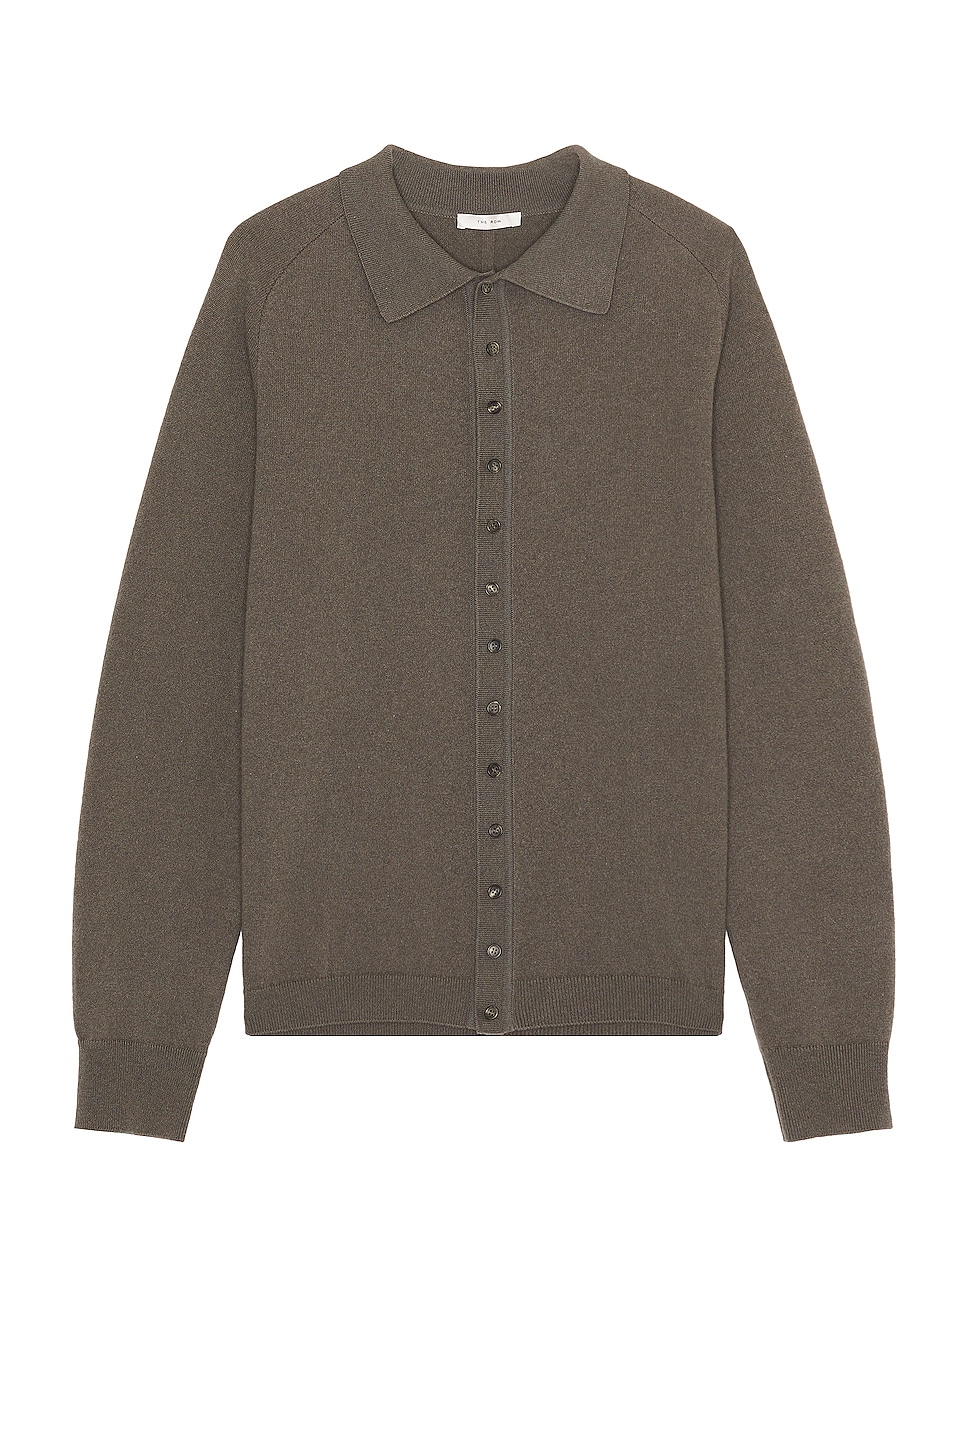 Image 1 of The Row Sinclair Top in Grey & Green